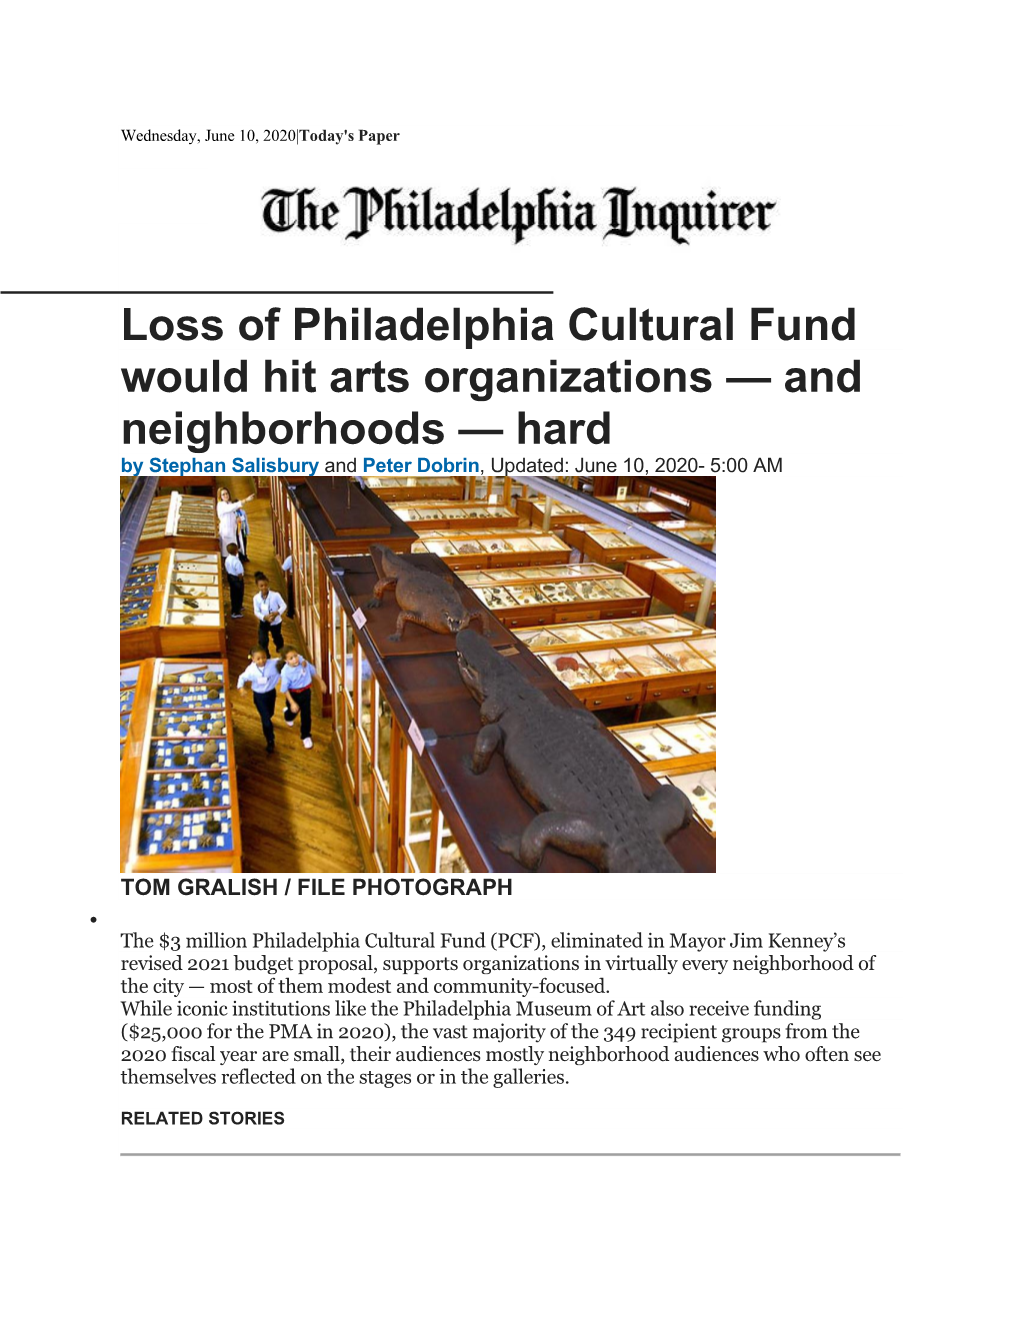 Loss of Philadelphia Cultural Fund Would Hit Arts Organizations — and Neighborhoods — Hard by Stephan Salisbury and Peter Dobrin, Updated: June 10, 2020- 5:00 AM